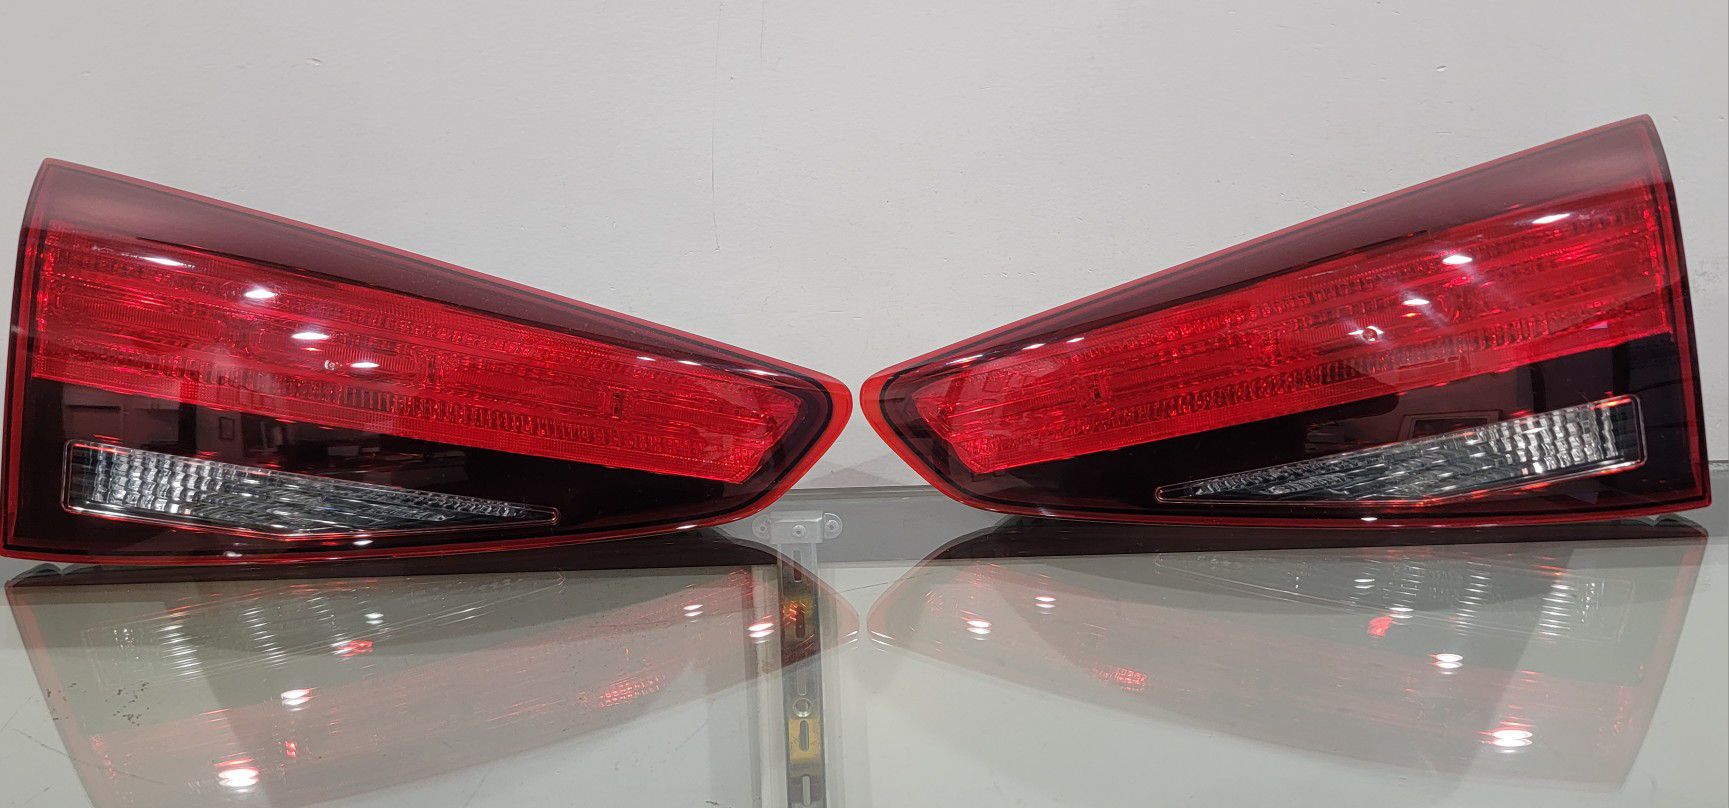 2019 to 2021 Tail Lights Assembly InnerTrunk ( Hyundai Tucson)